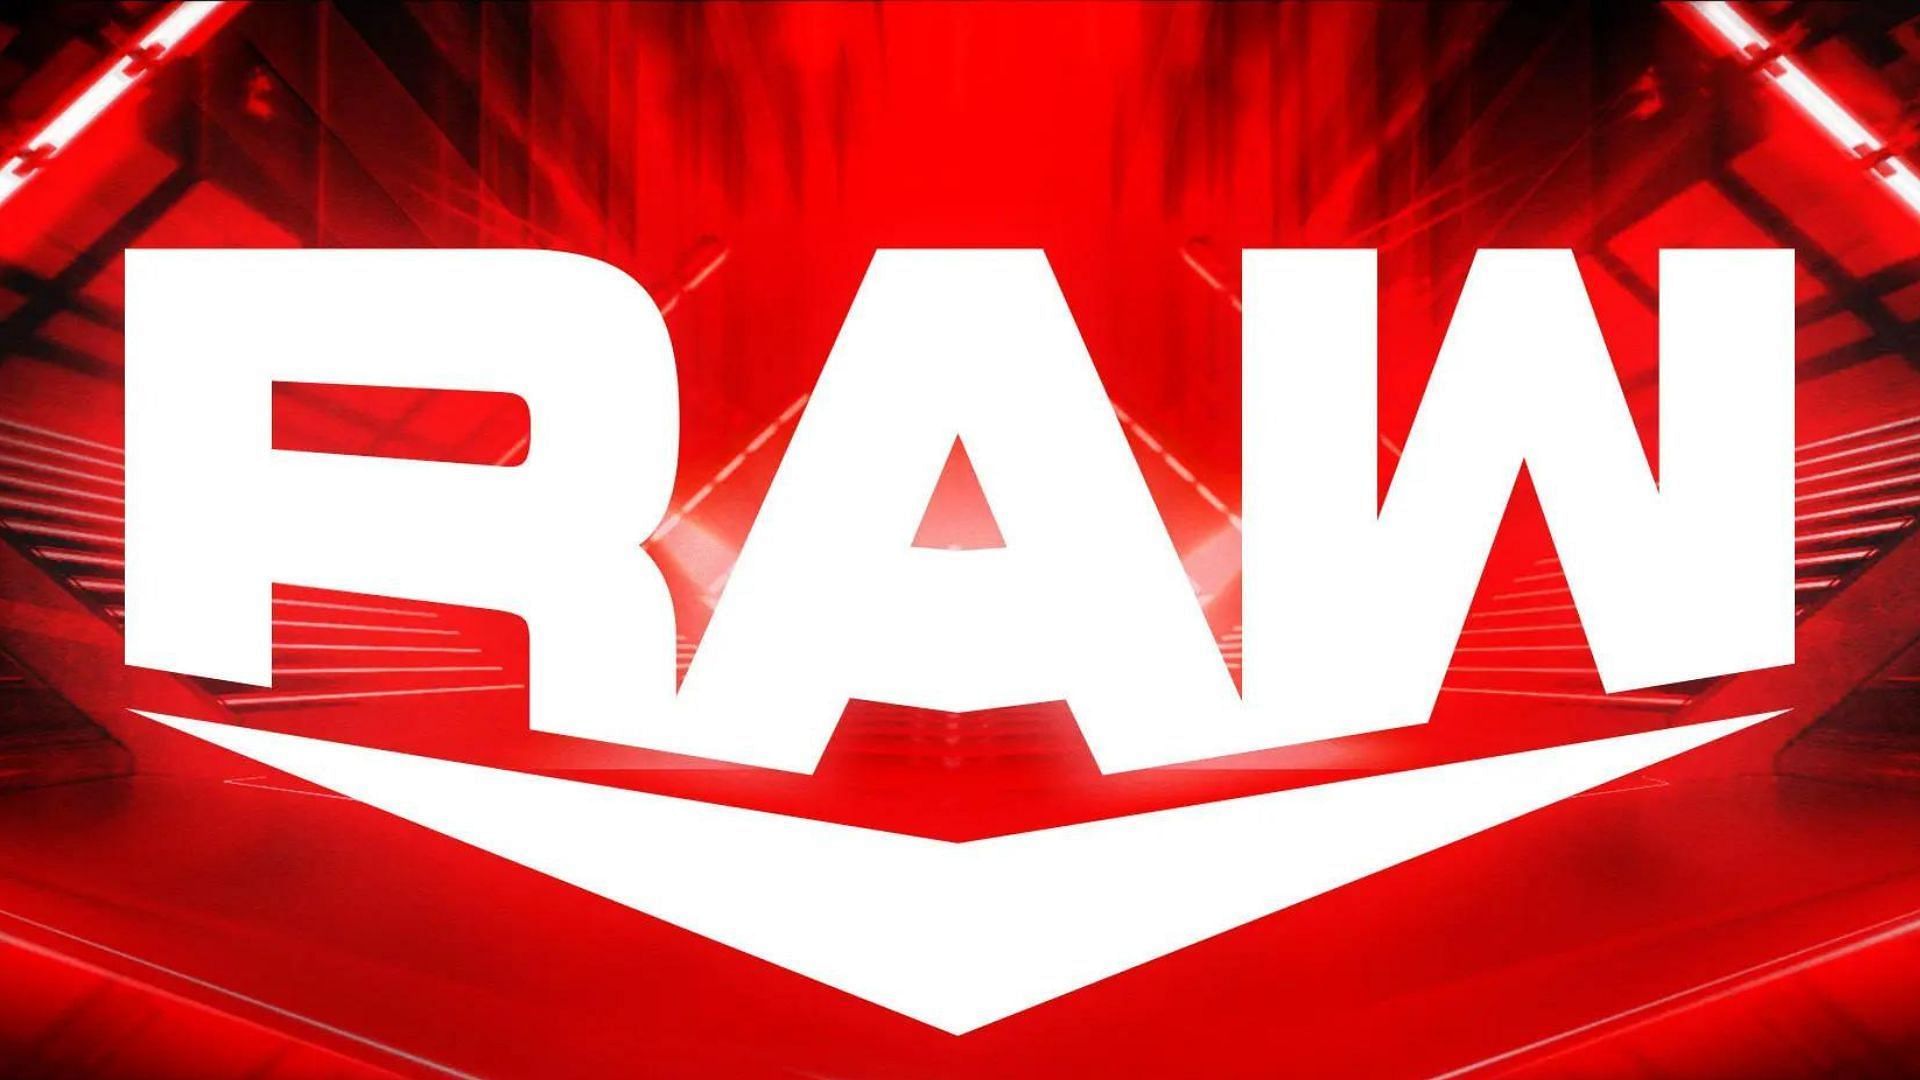 WWE RAW airs live from Cleveland, Ohio tonight.